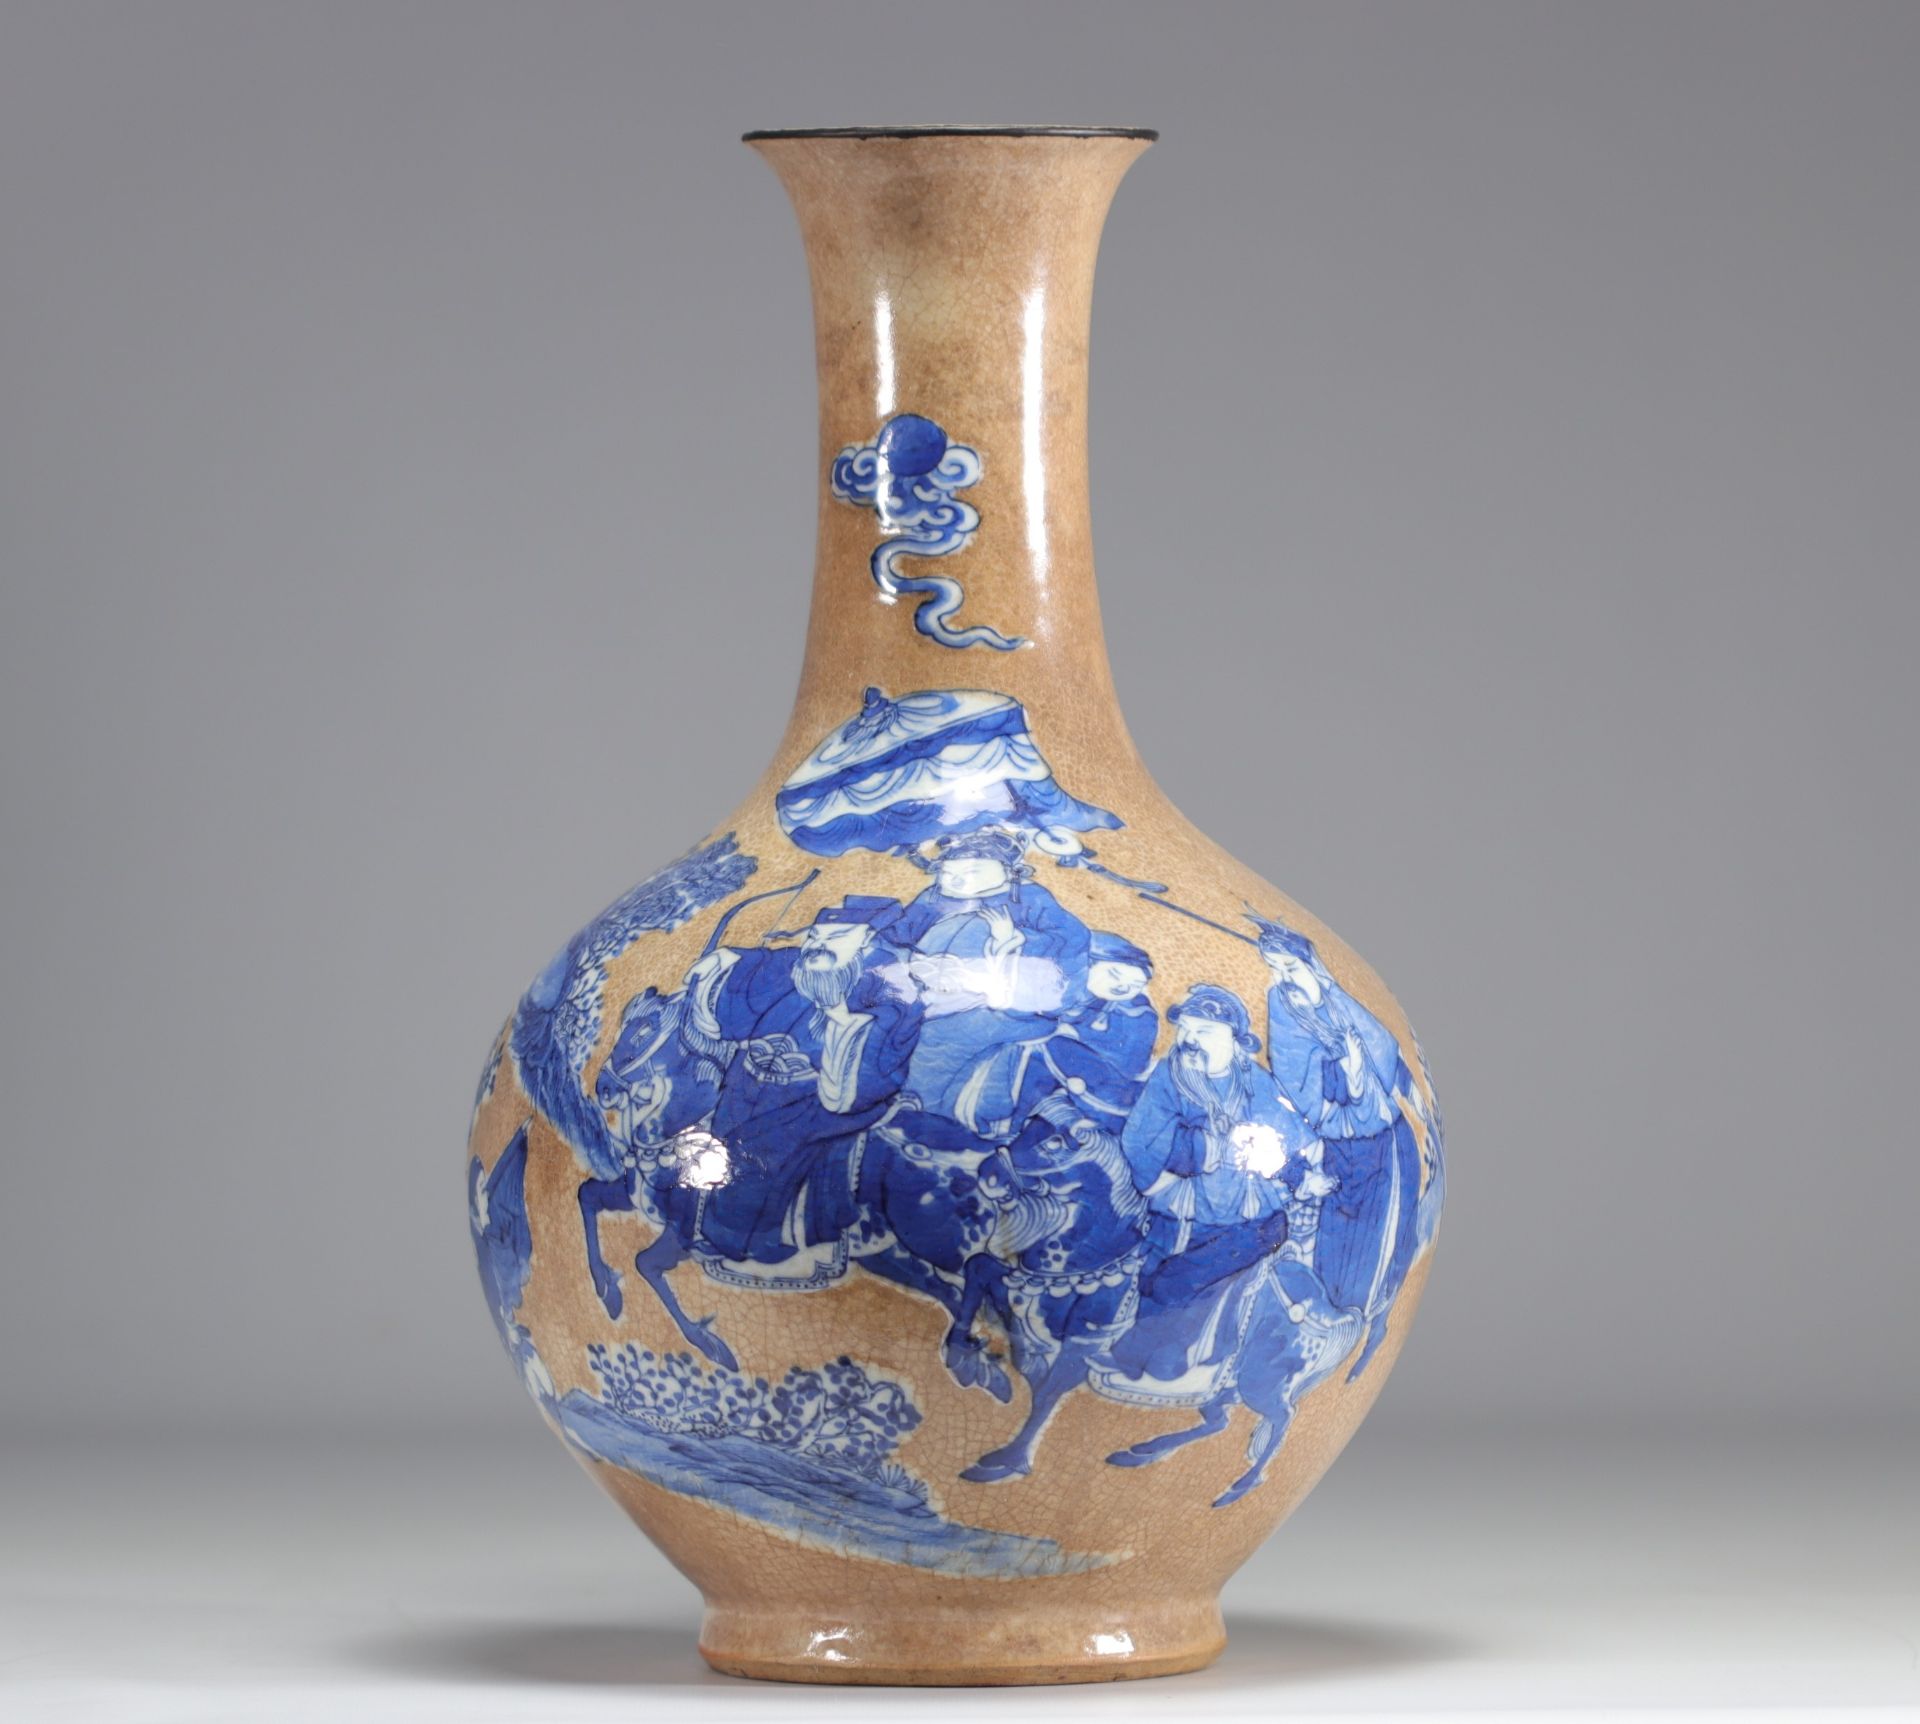 Chinese porcelain vase "Nankin" decorated with a deer hunt on a cracked white background